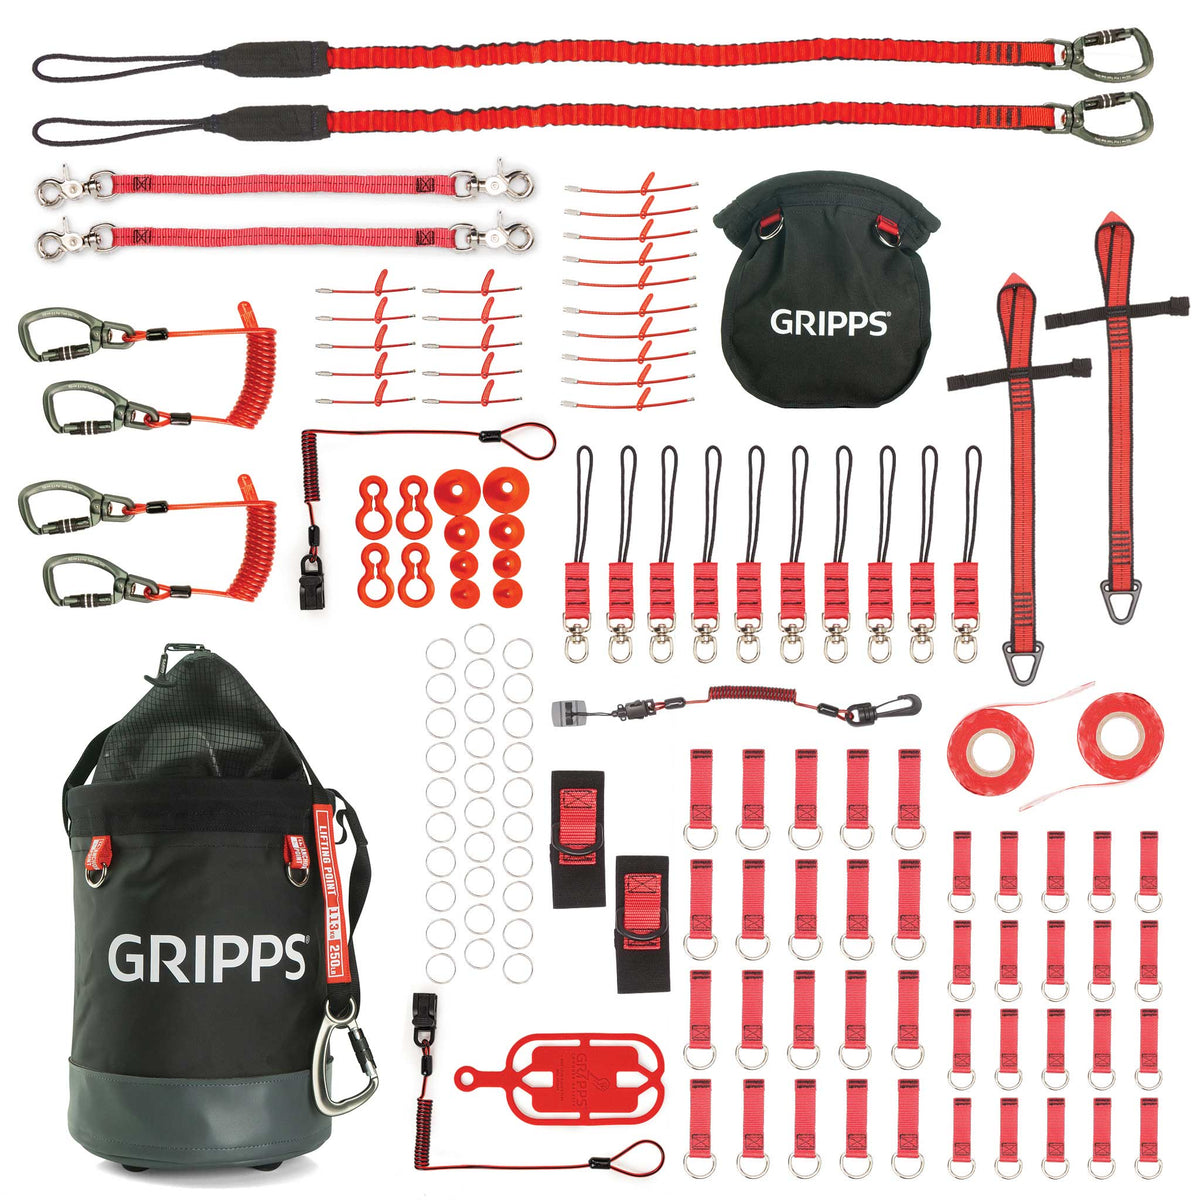 60-Tool Tether Kit With Bull Bag And Bolt-Safe Pouch